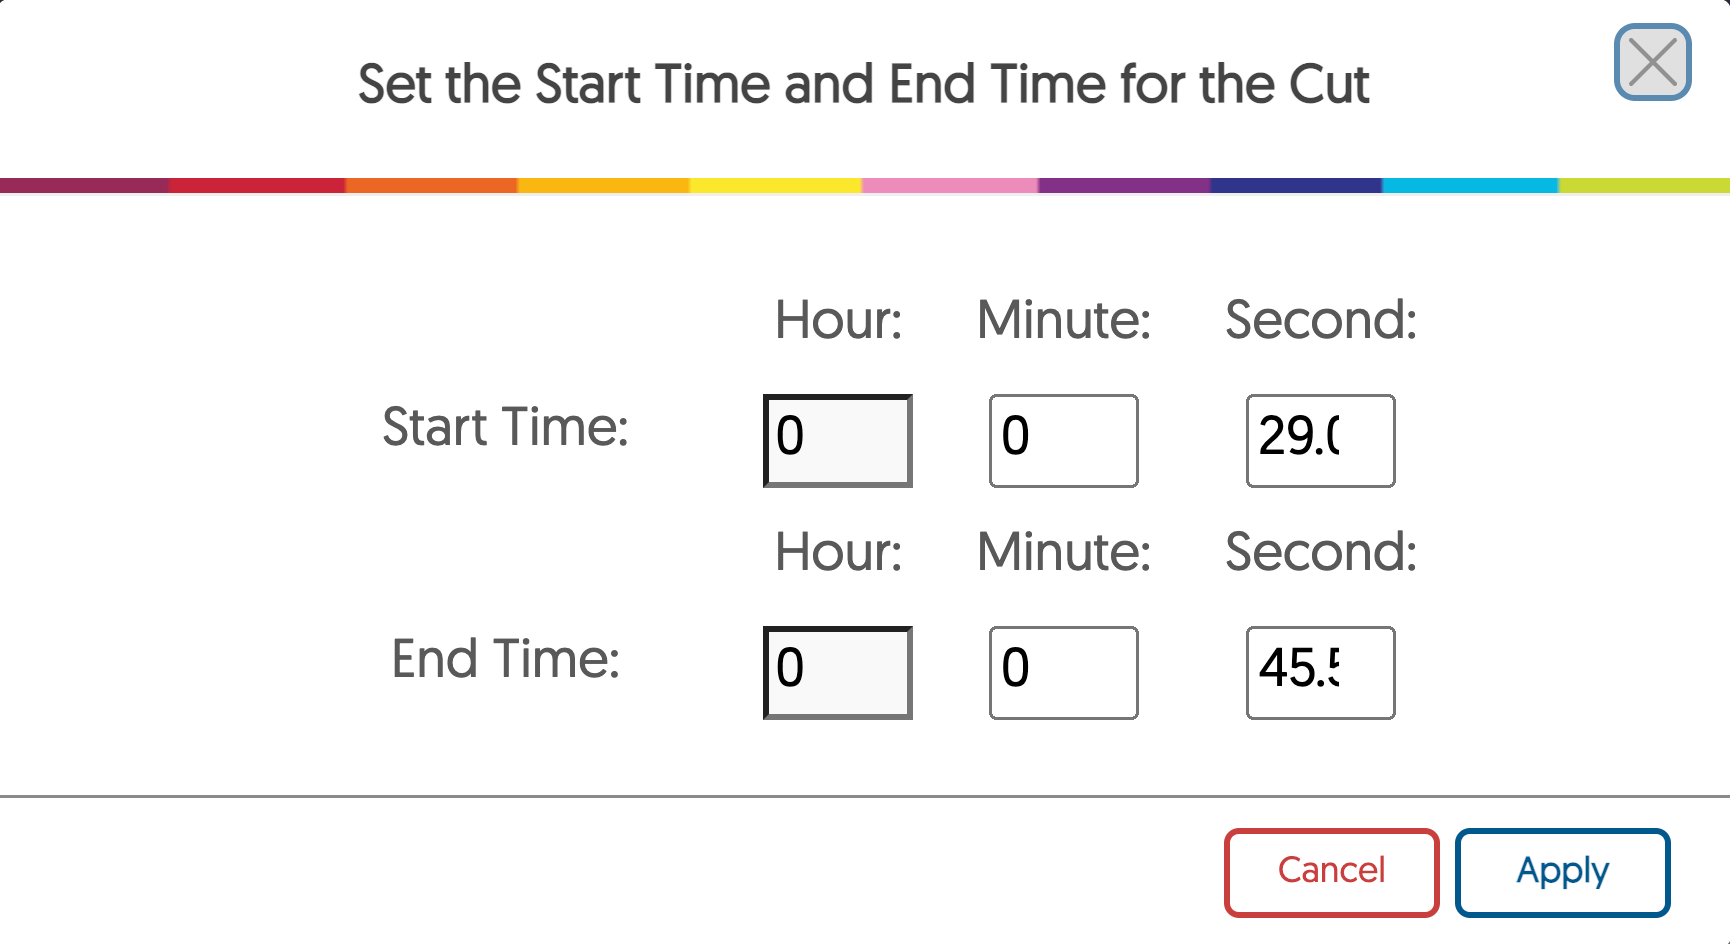 Video start and end time edit options.